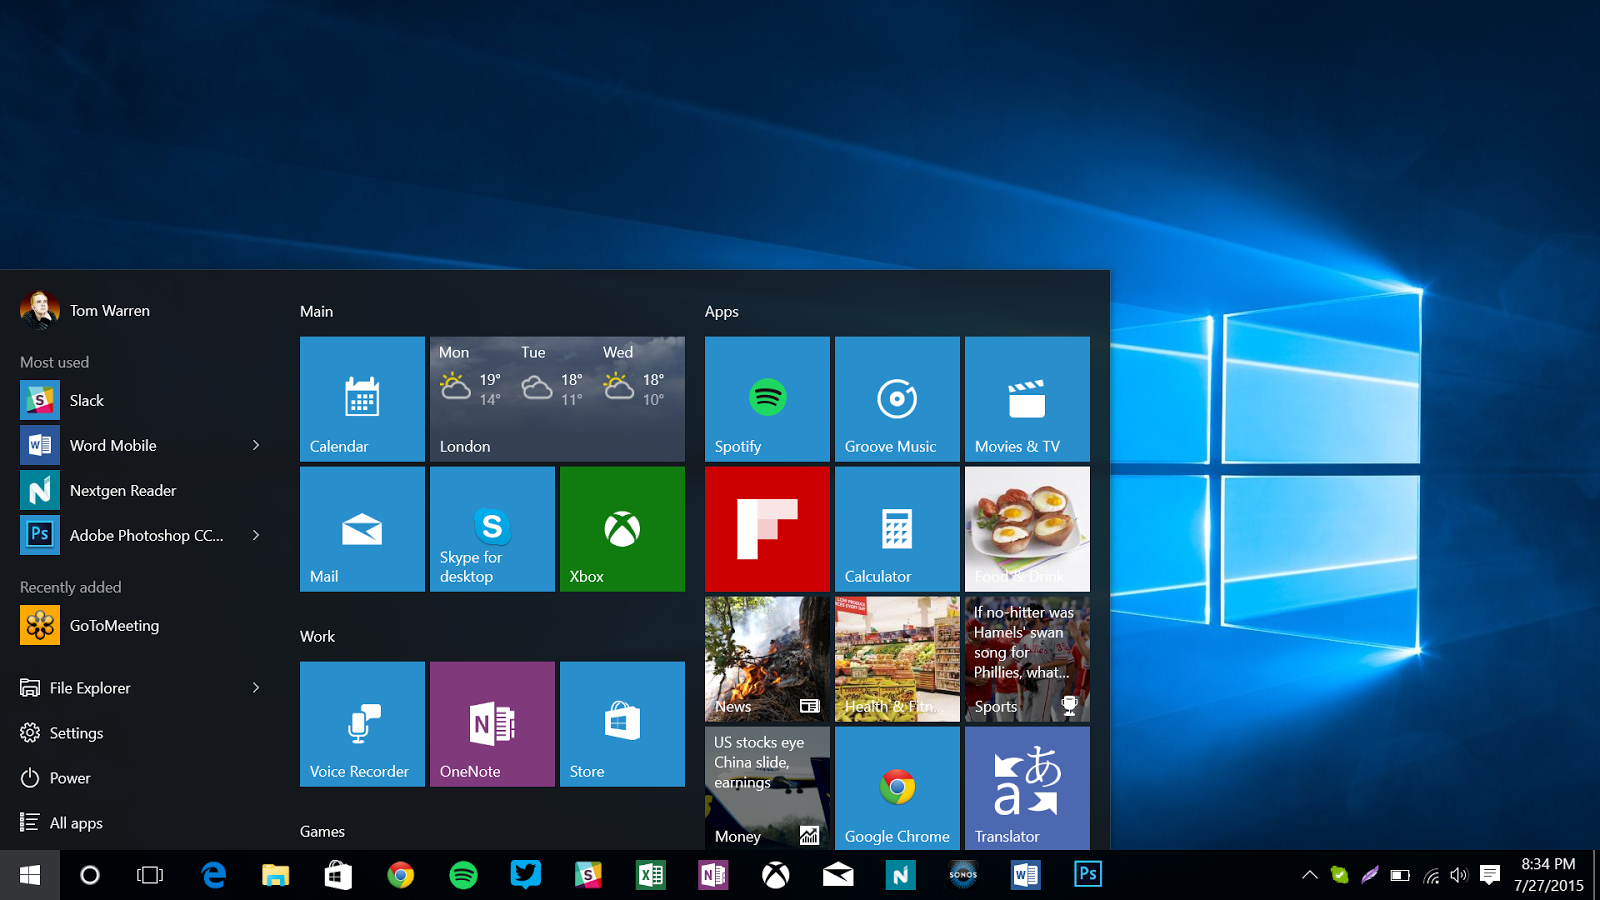 windows 10 download iso